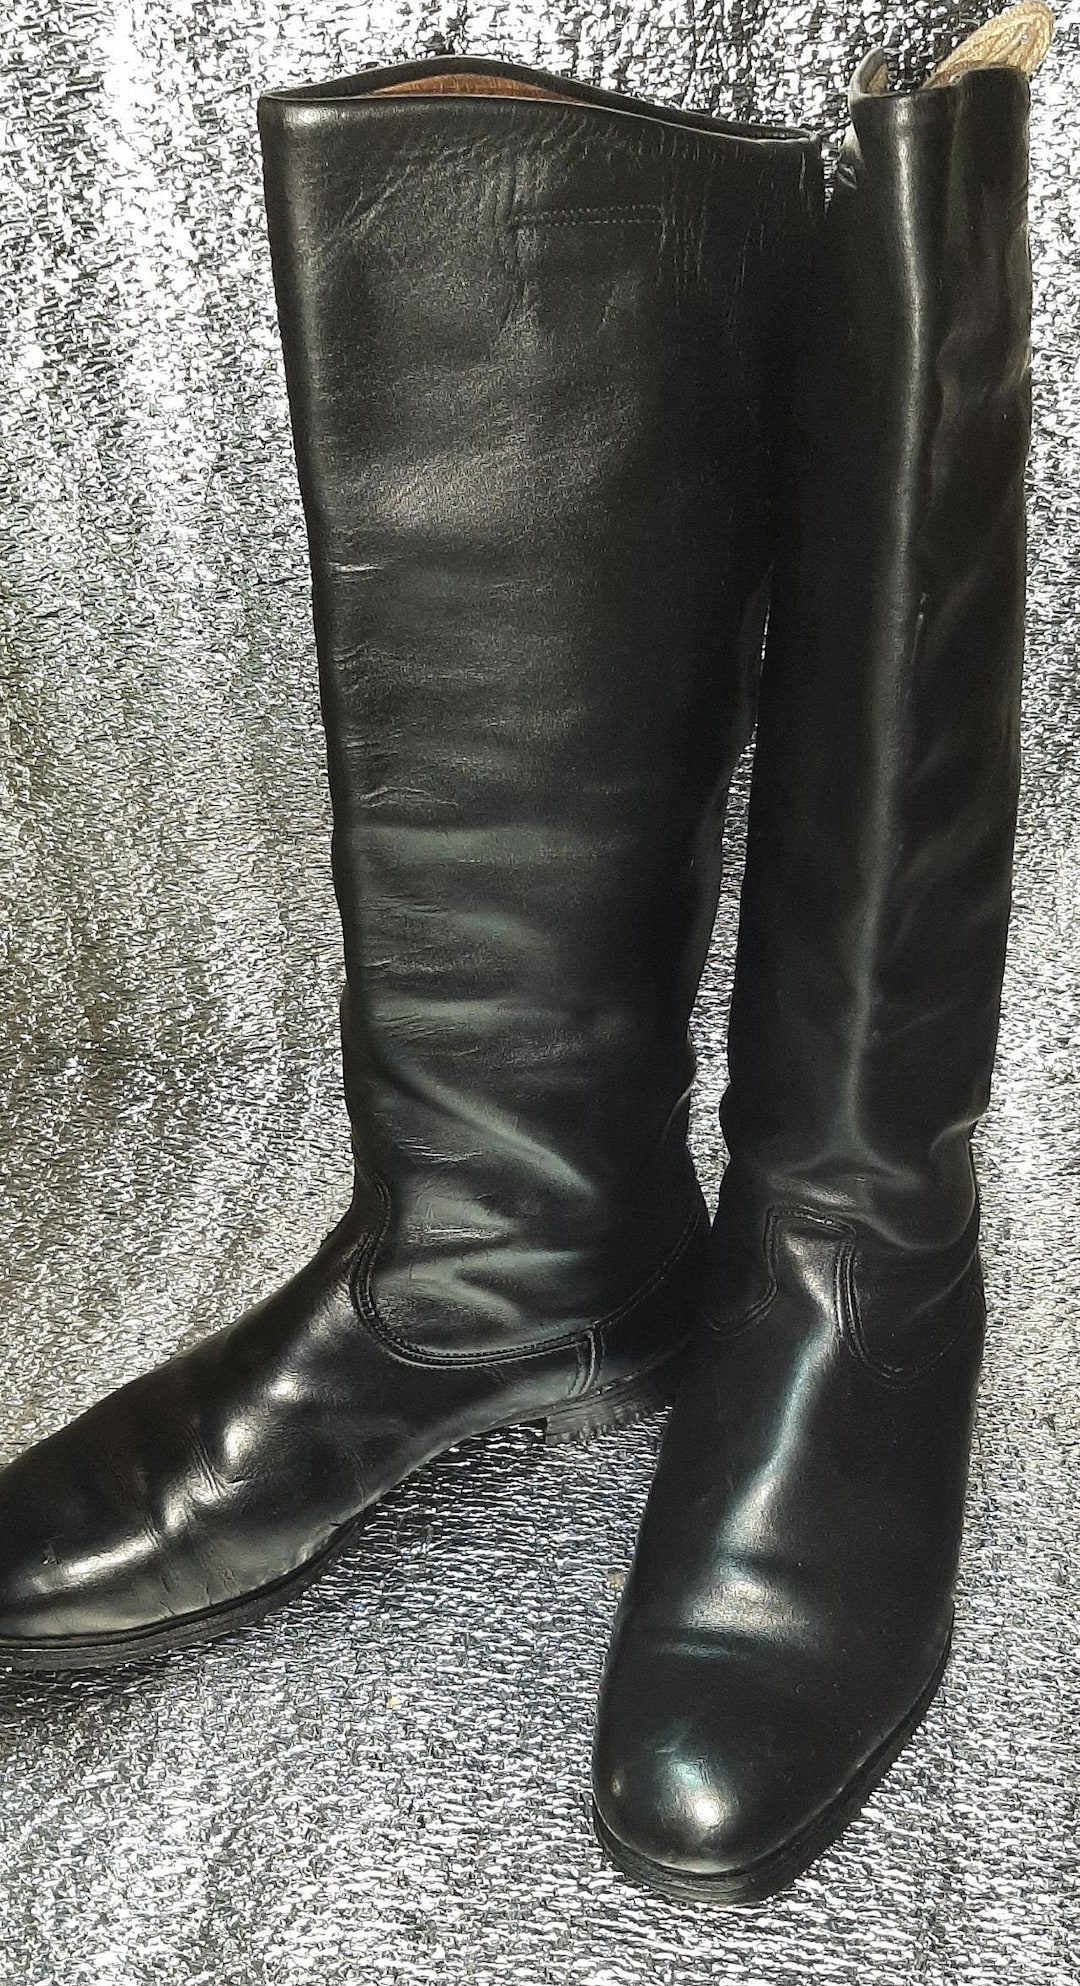 Soviet Military Leather Chrome Boots Highest Command Personnel USSR - Etsy